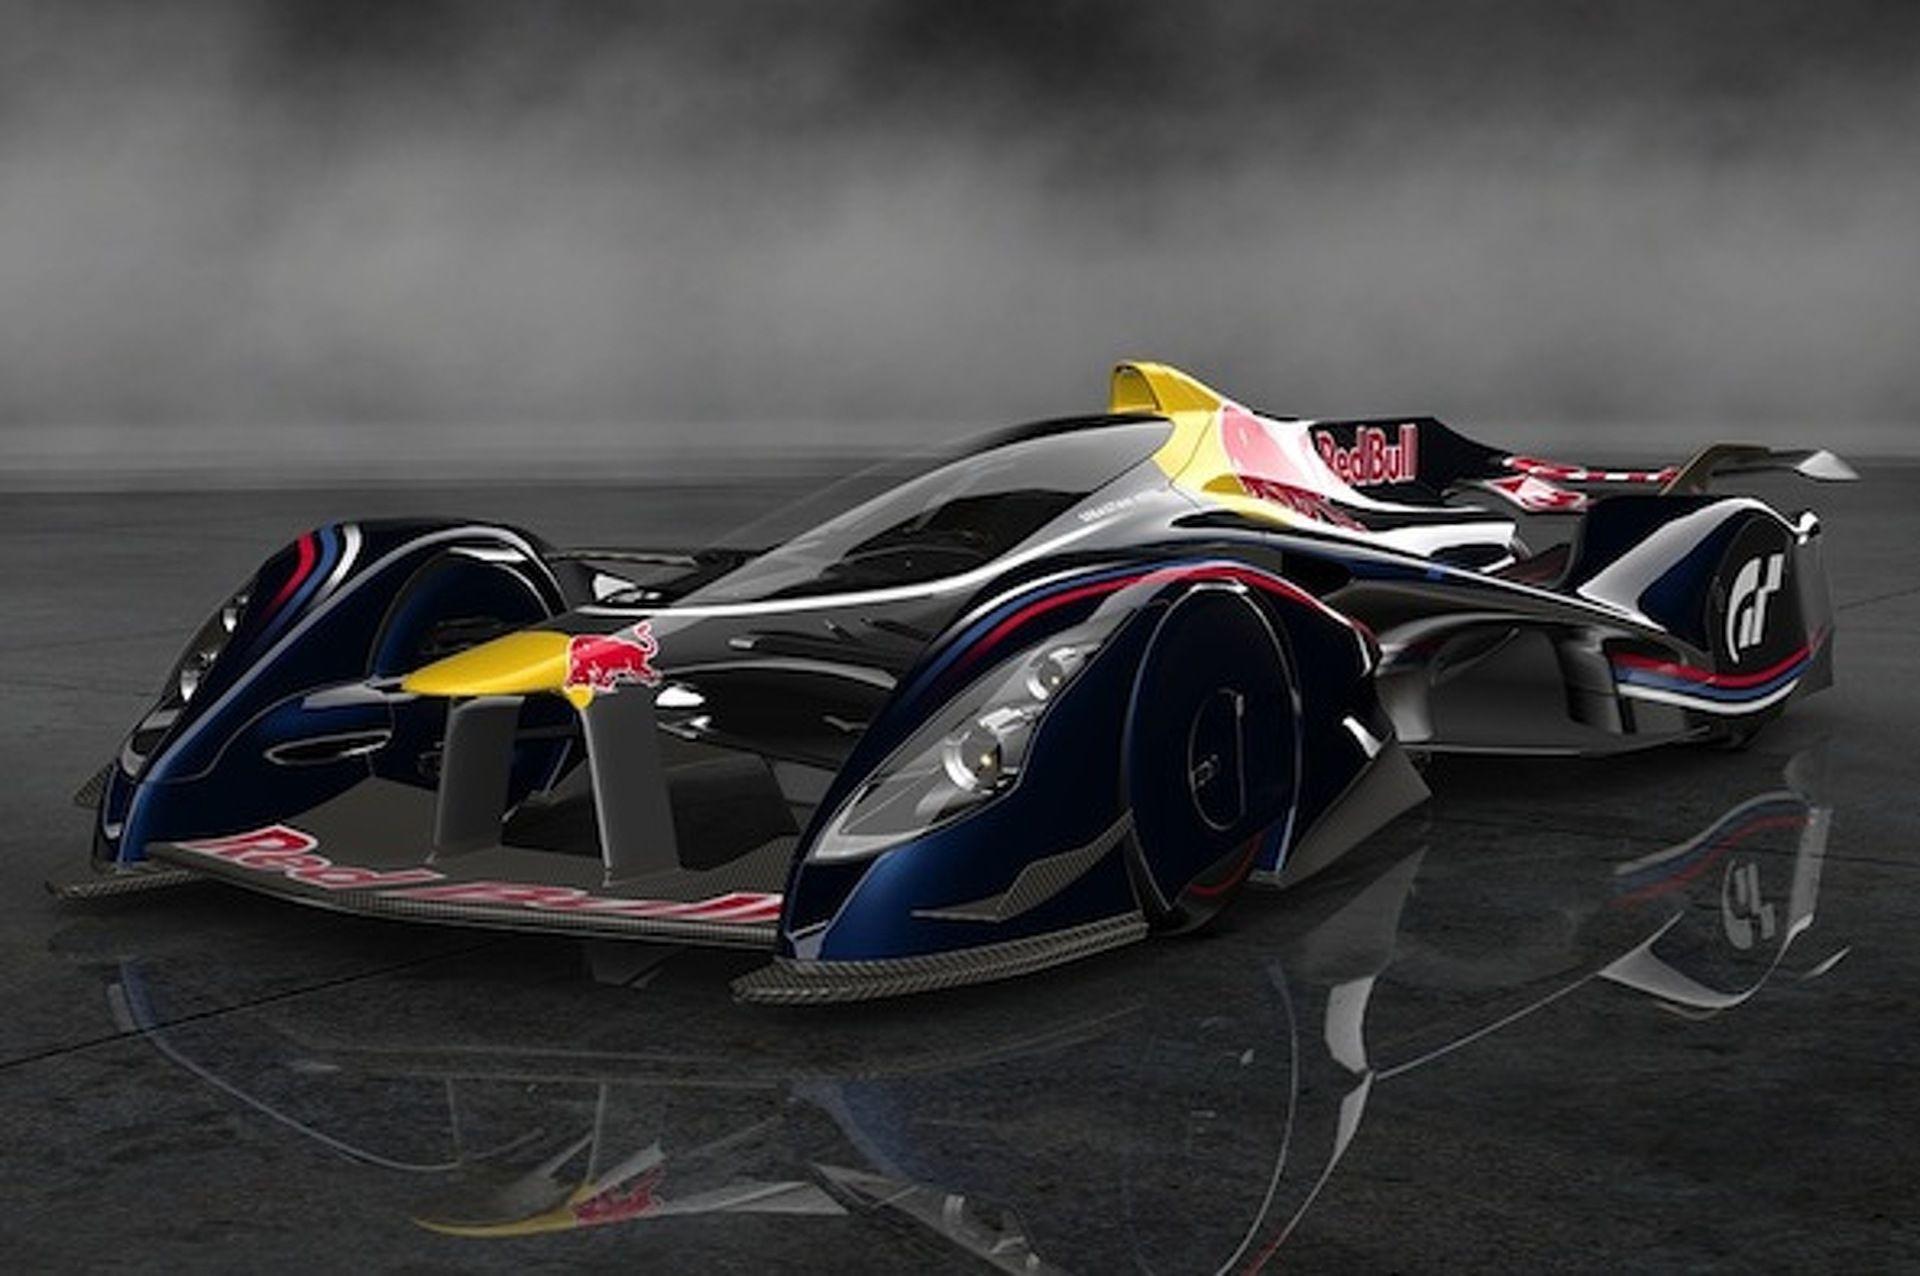 Cool Red Bull Logo - GT6 Red Bull X2014 Concept is Scary Fast, Scary Cool | Motor1.com Photos